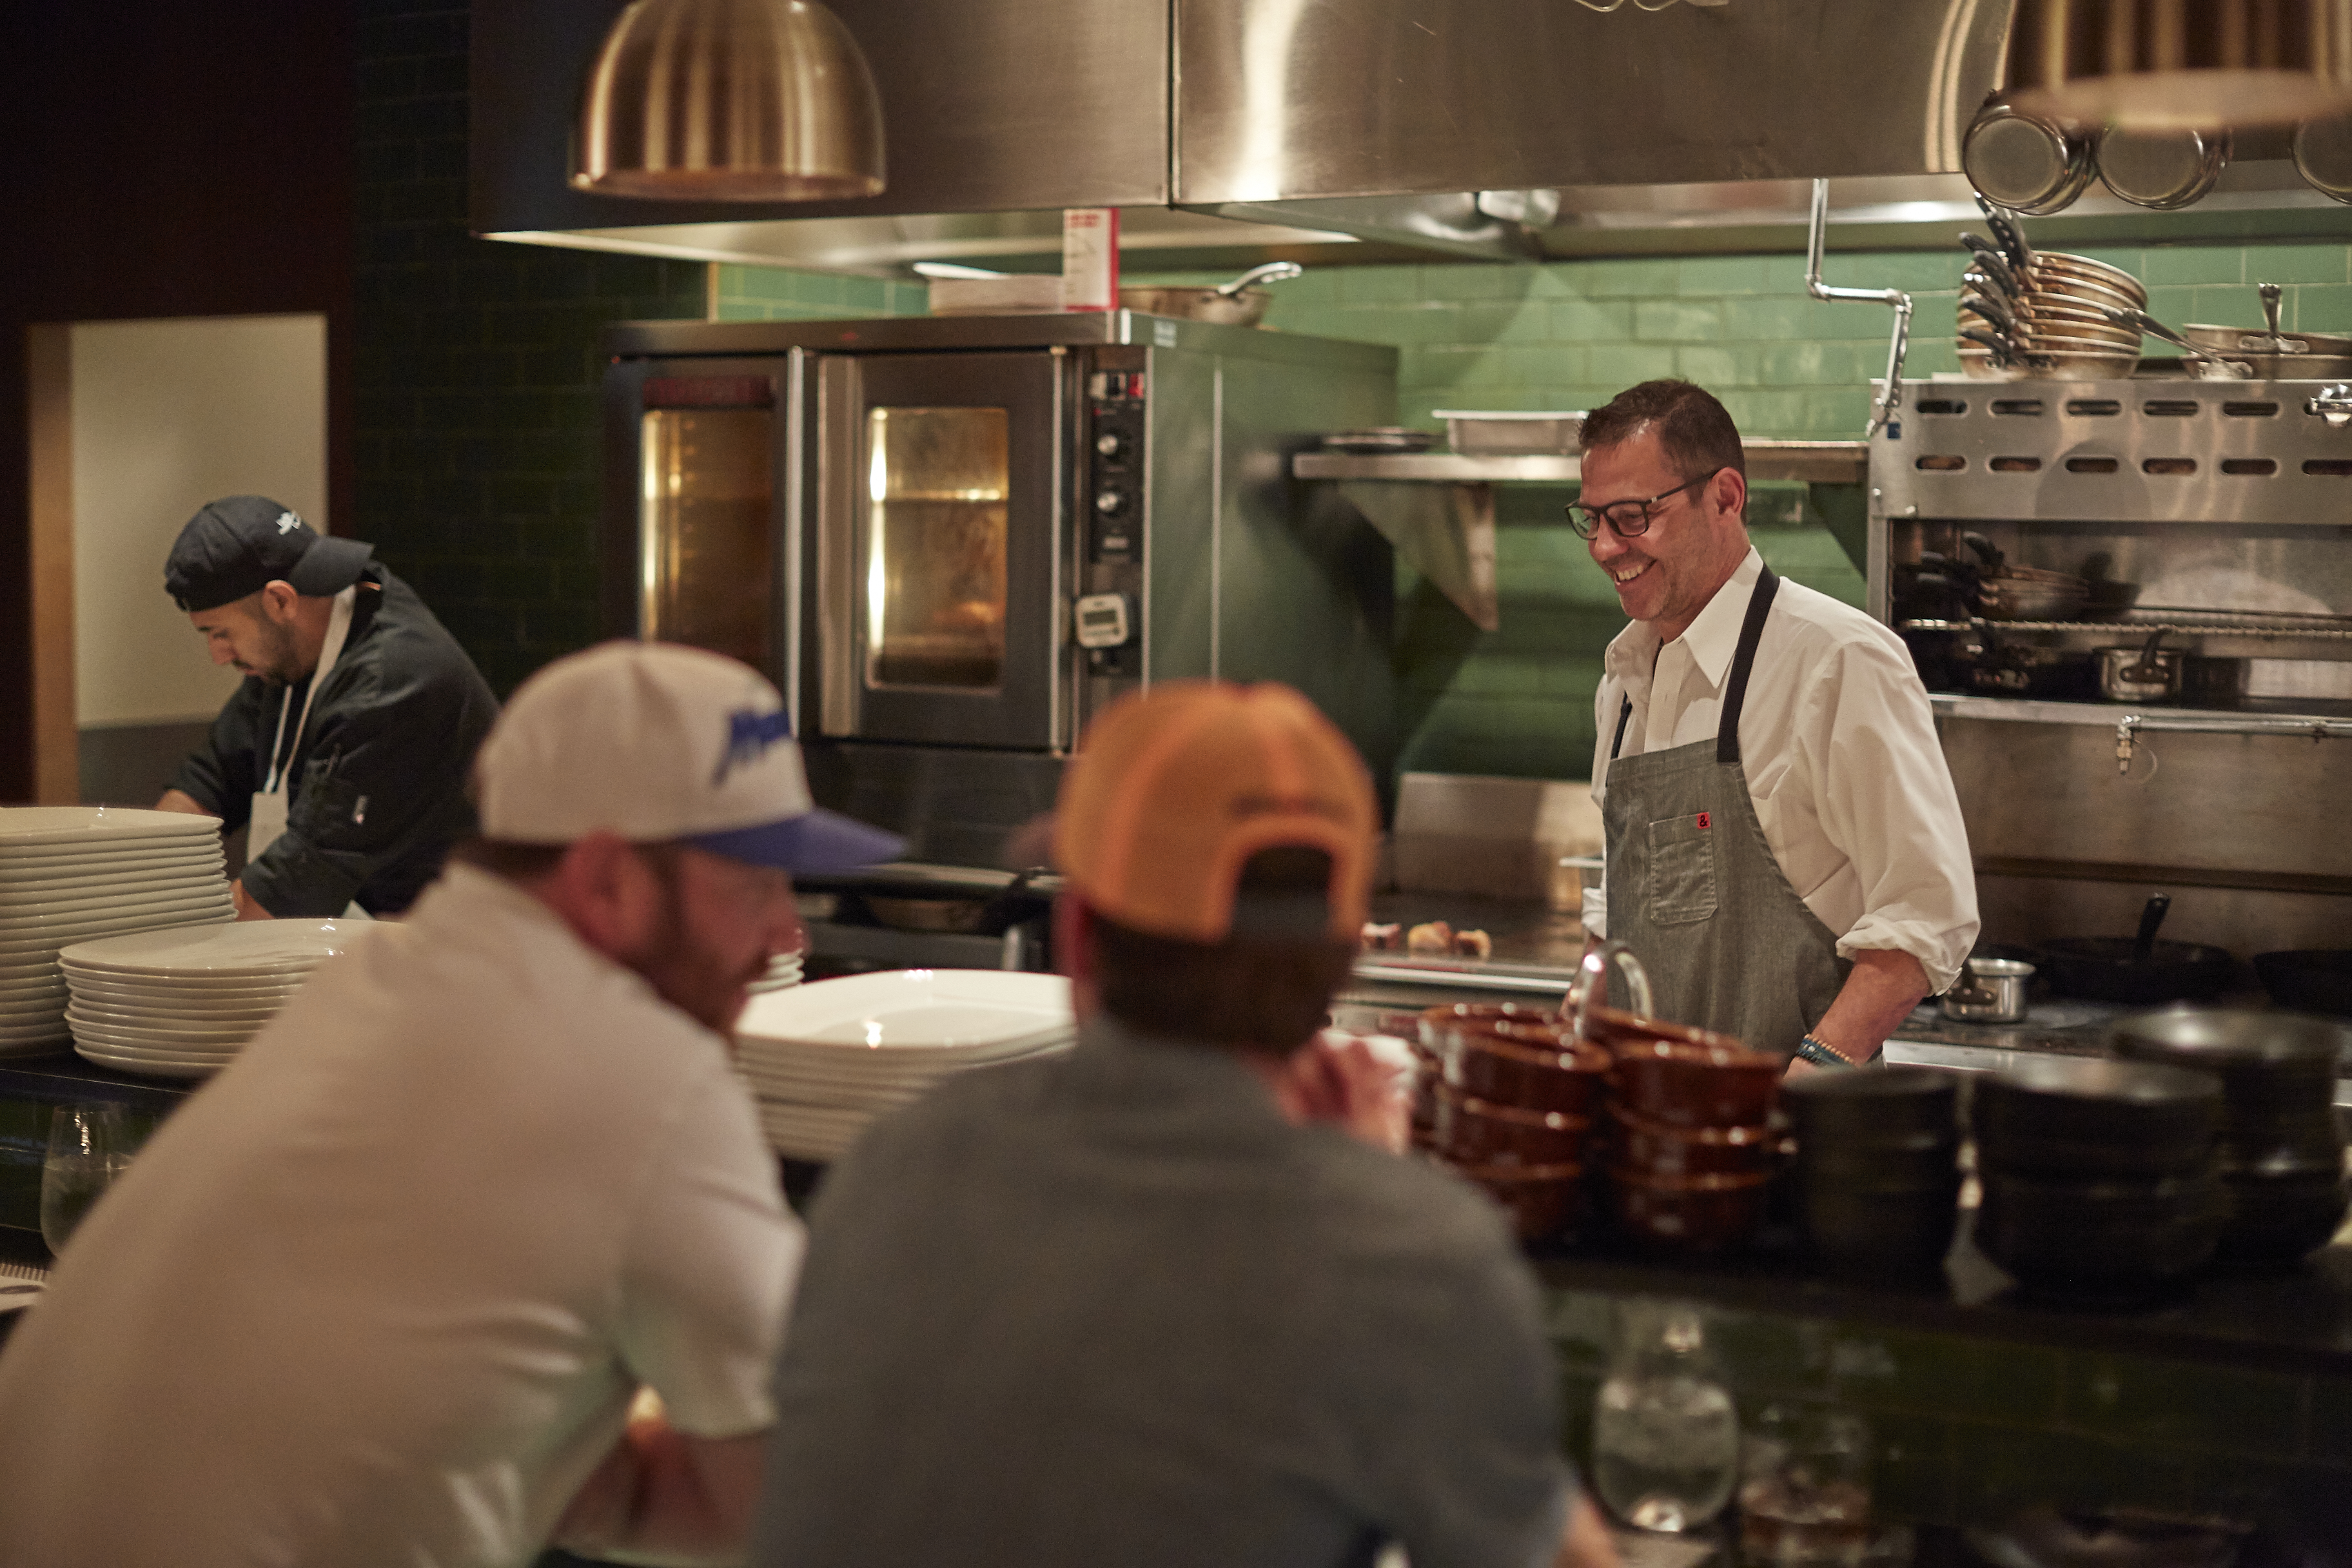 Diners in baseball caps sit in the foreground while chef John Tesar laughs in the kitchen of Knife in the background. Behind him are the restaurant’s green tiled walls and steel kitchen appliances.